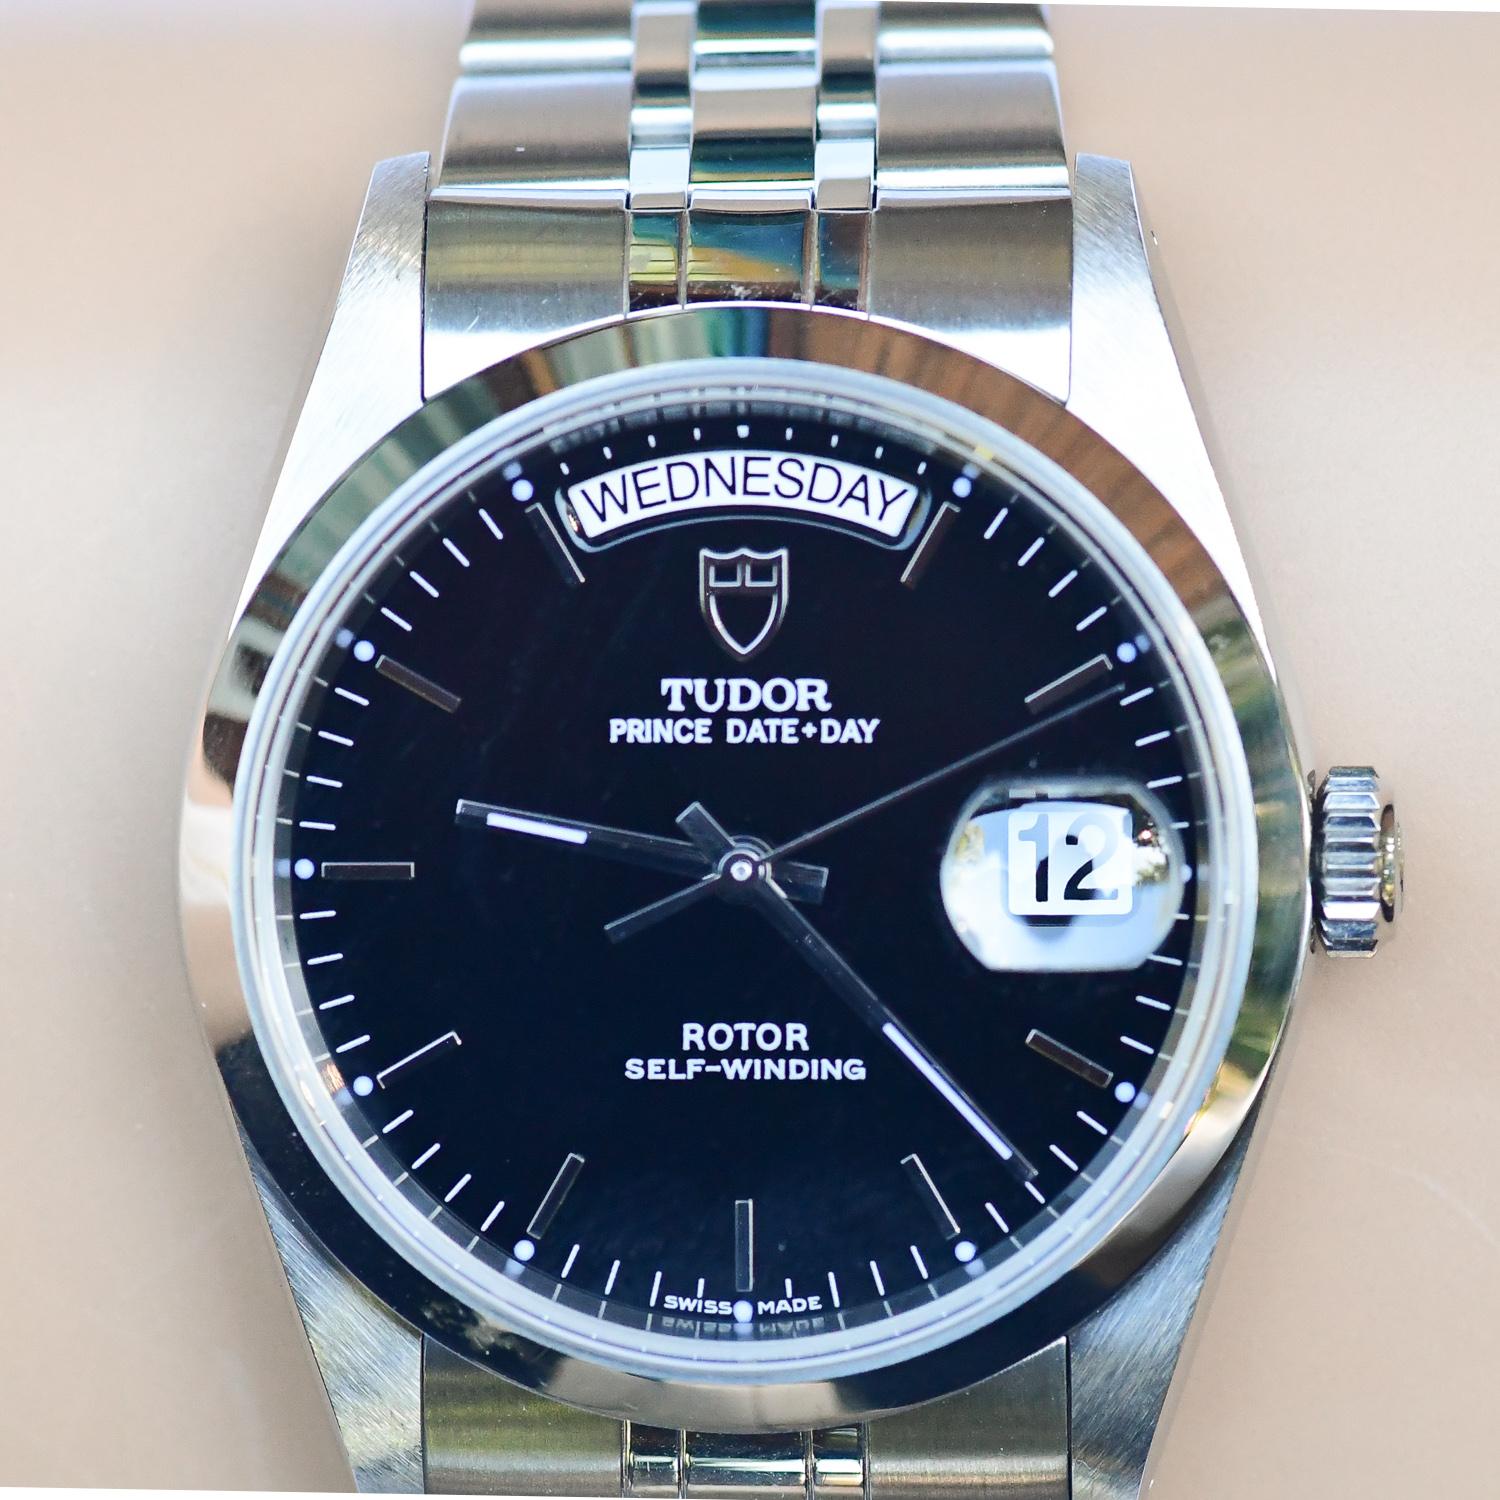 Pre-Owned Tudor Prince Day-Date (76200) self-winding automatic watch, features a 36mm stainless steel case surrounding a black dial on a stainless steel bracelet with folding buckle. Functions include hours, minutes, seconds, day and date. This